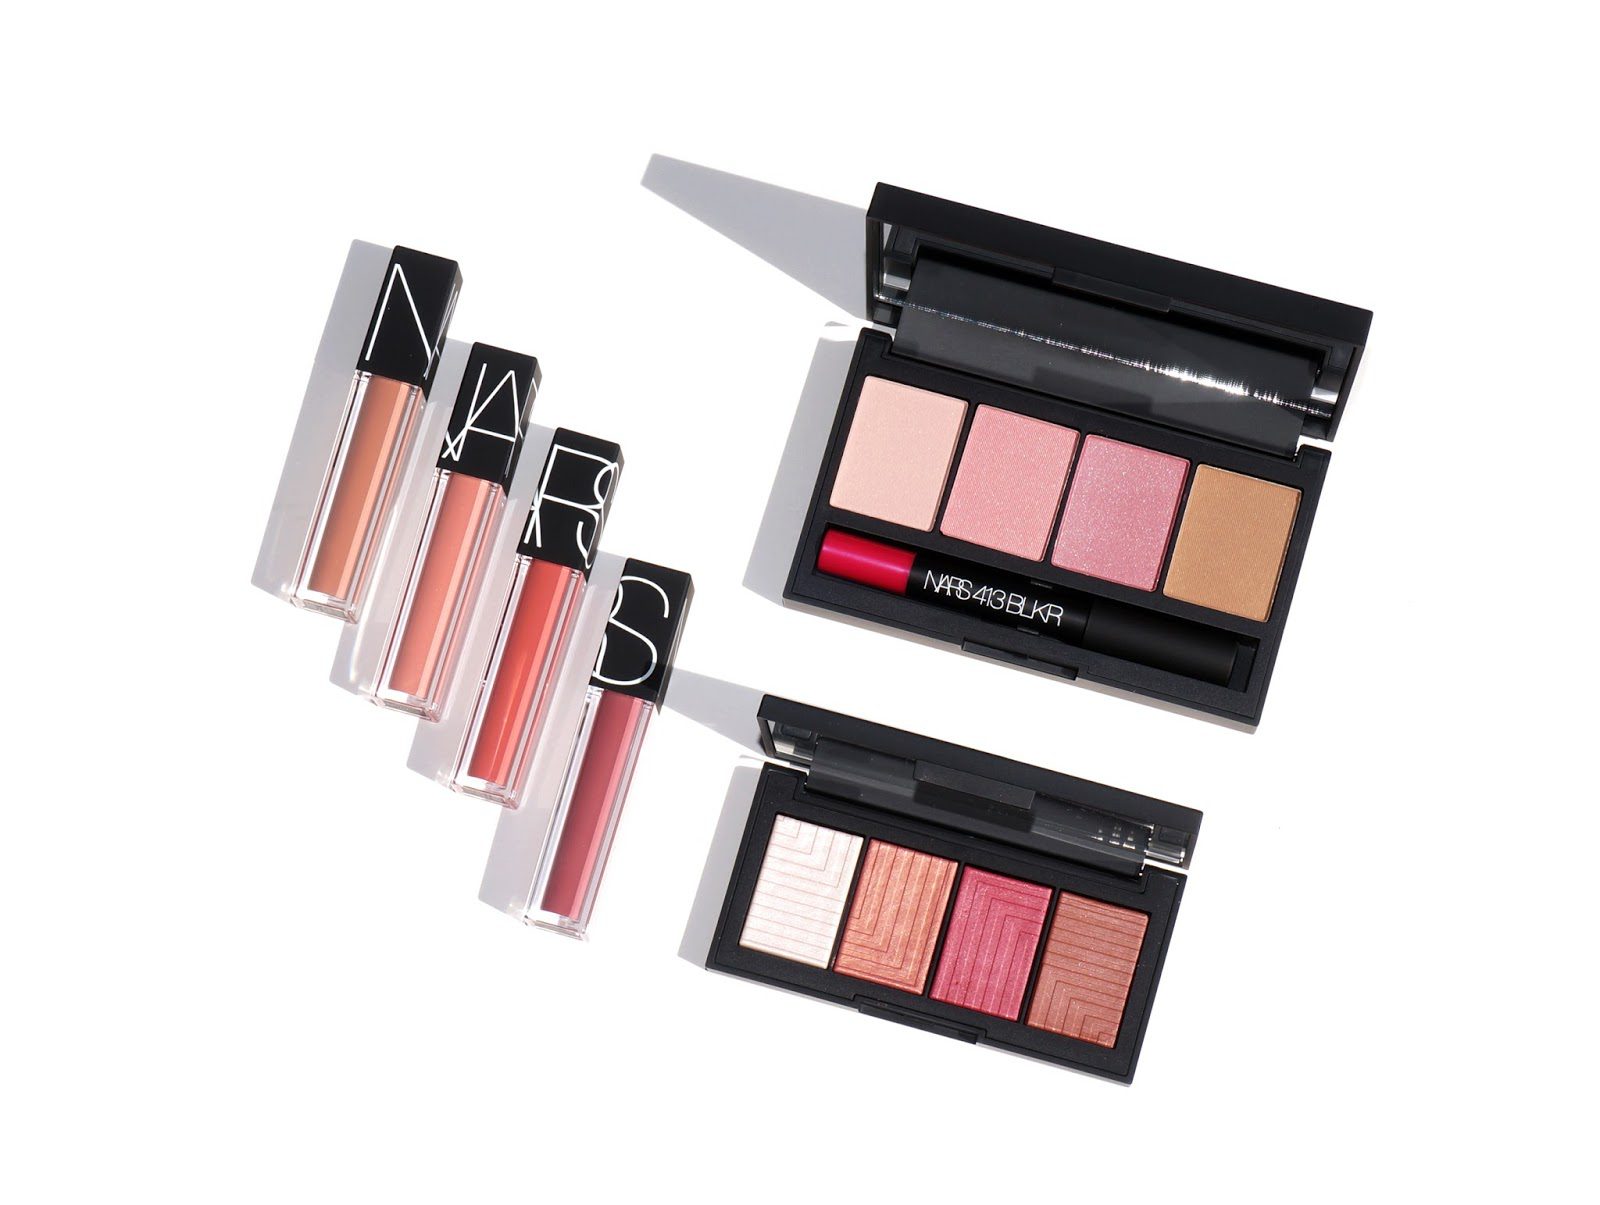 The Beauty Look Book - NARS Velvet Lip Glide, 413 BLKR Cheek and Lip Palette and NARSissist Dual-Intensity Cheek Palette 